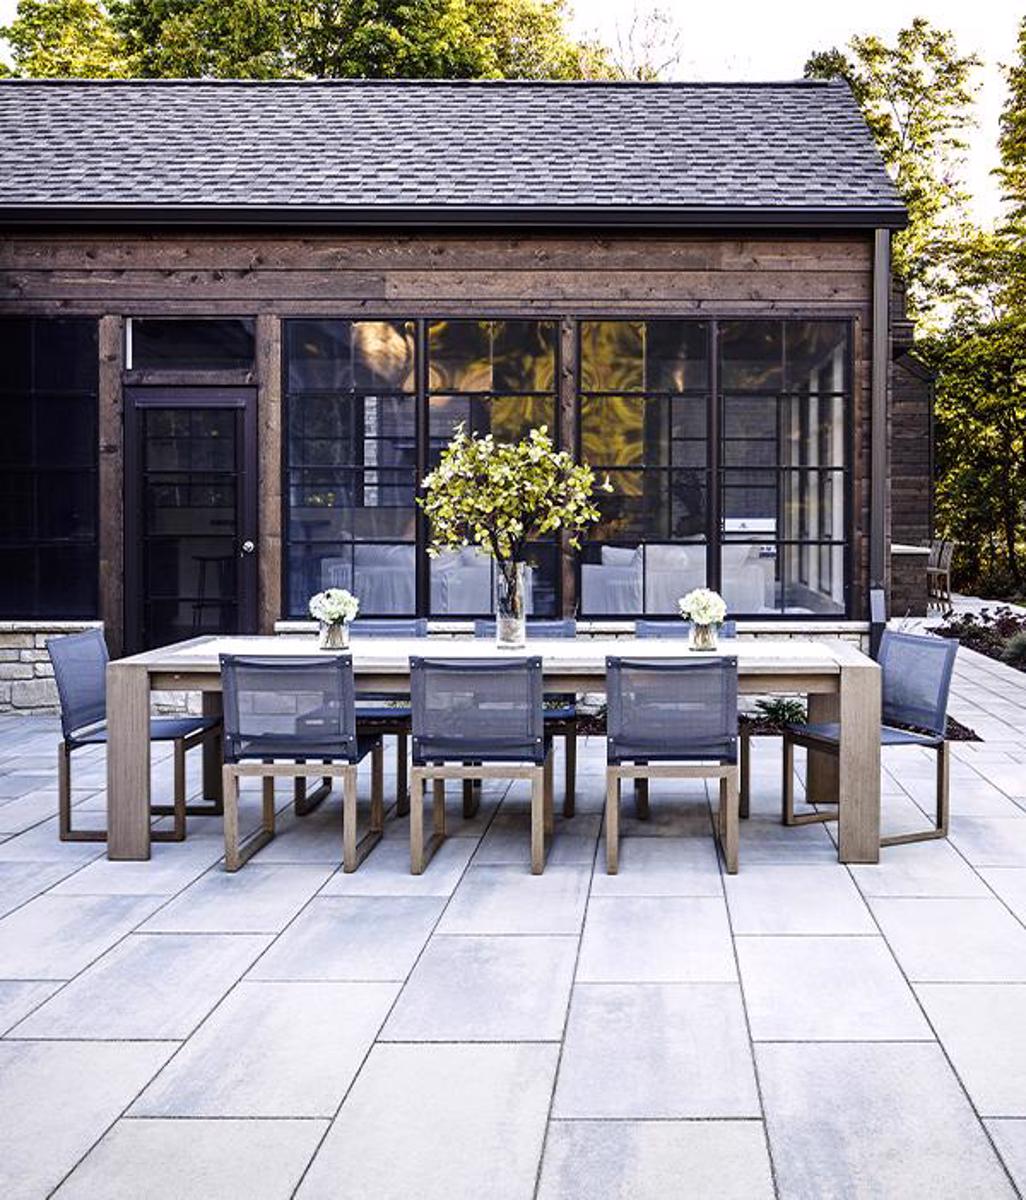 Techo bloc by style backyard patio dining table slabs grey rustic 2